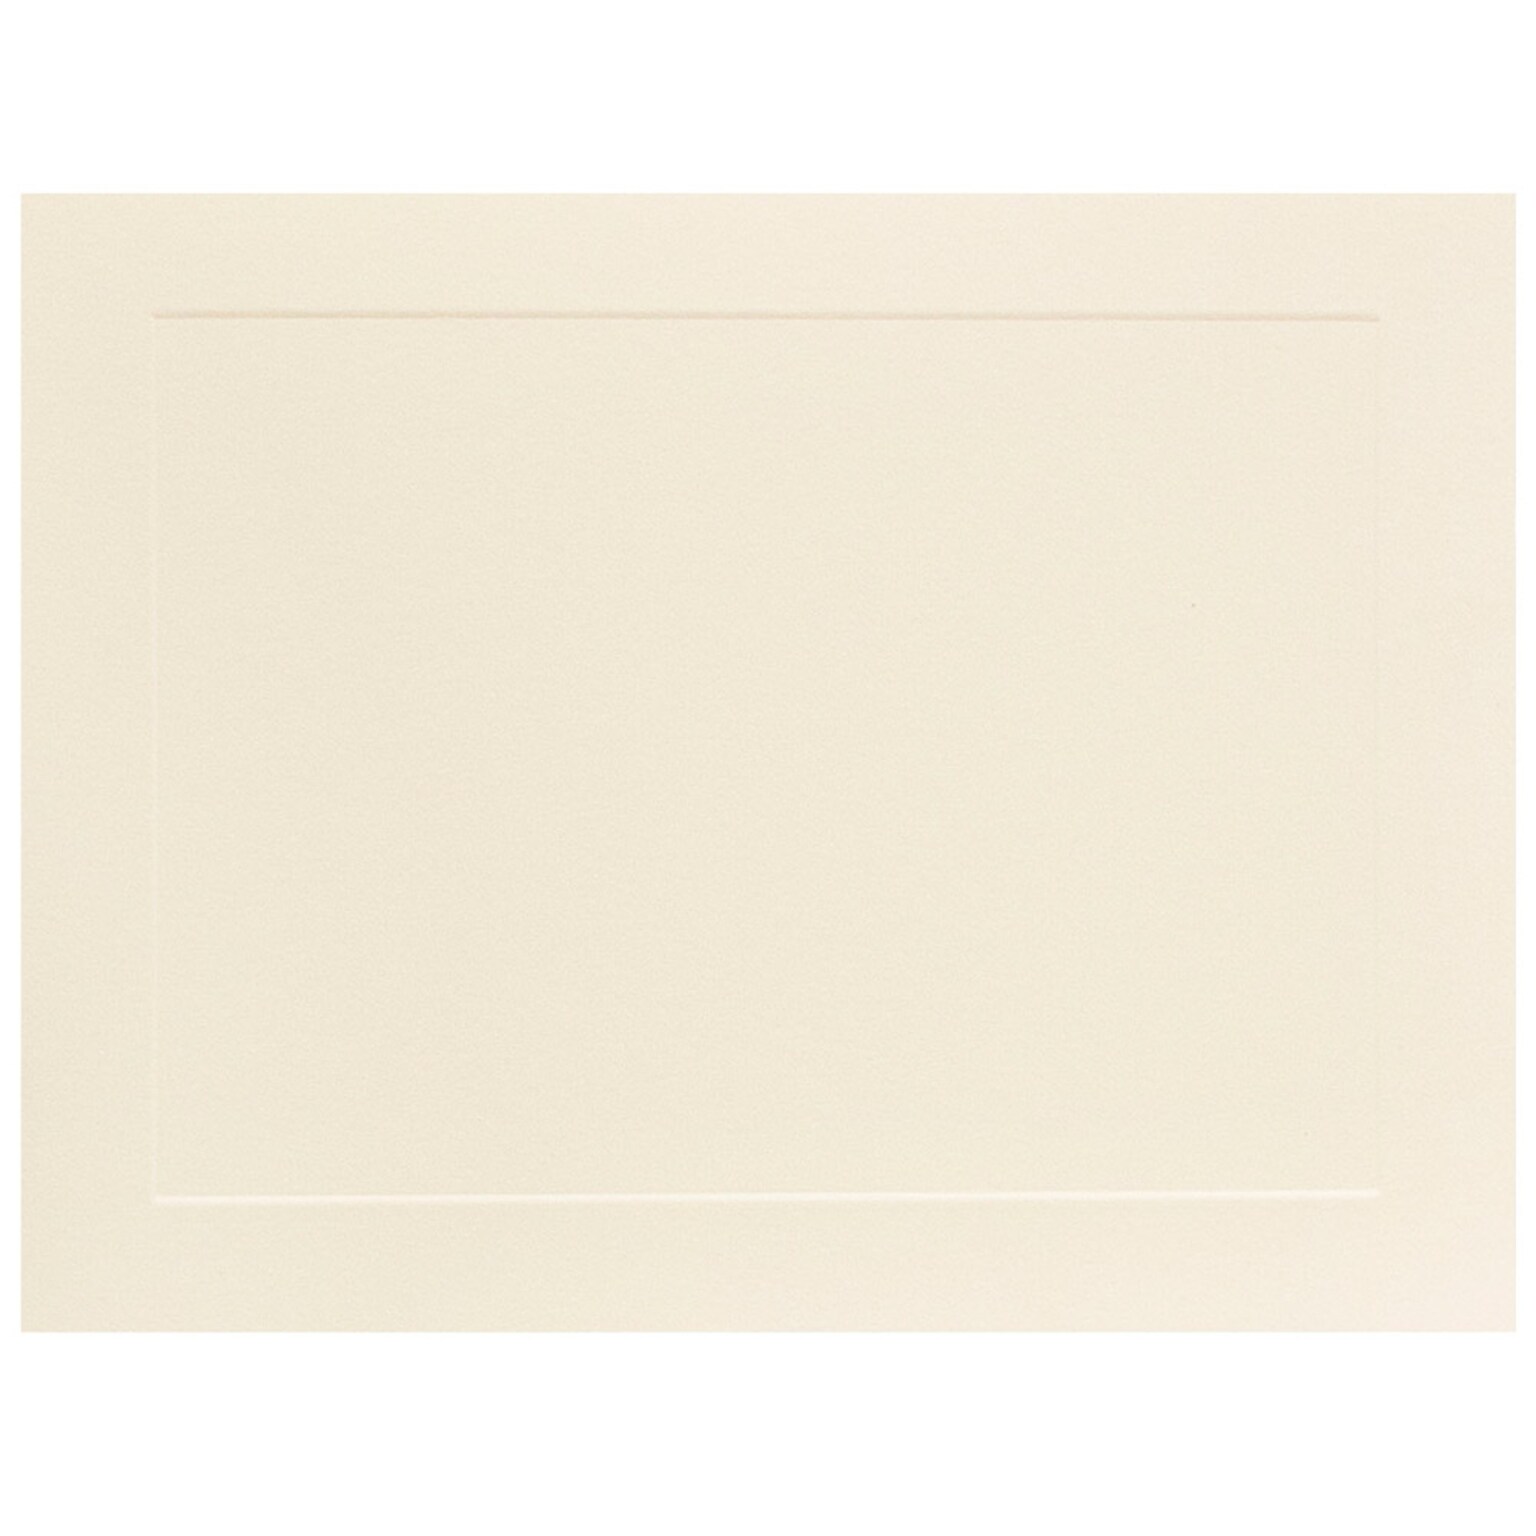 JAM Paper® Blank Flat Note Cards, A2 Size, 4 1/4 x 5.5, Ivory Panel, 50/Pack (175981i)